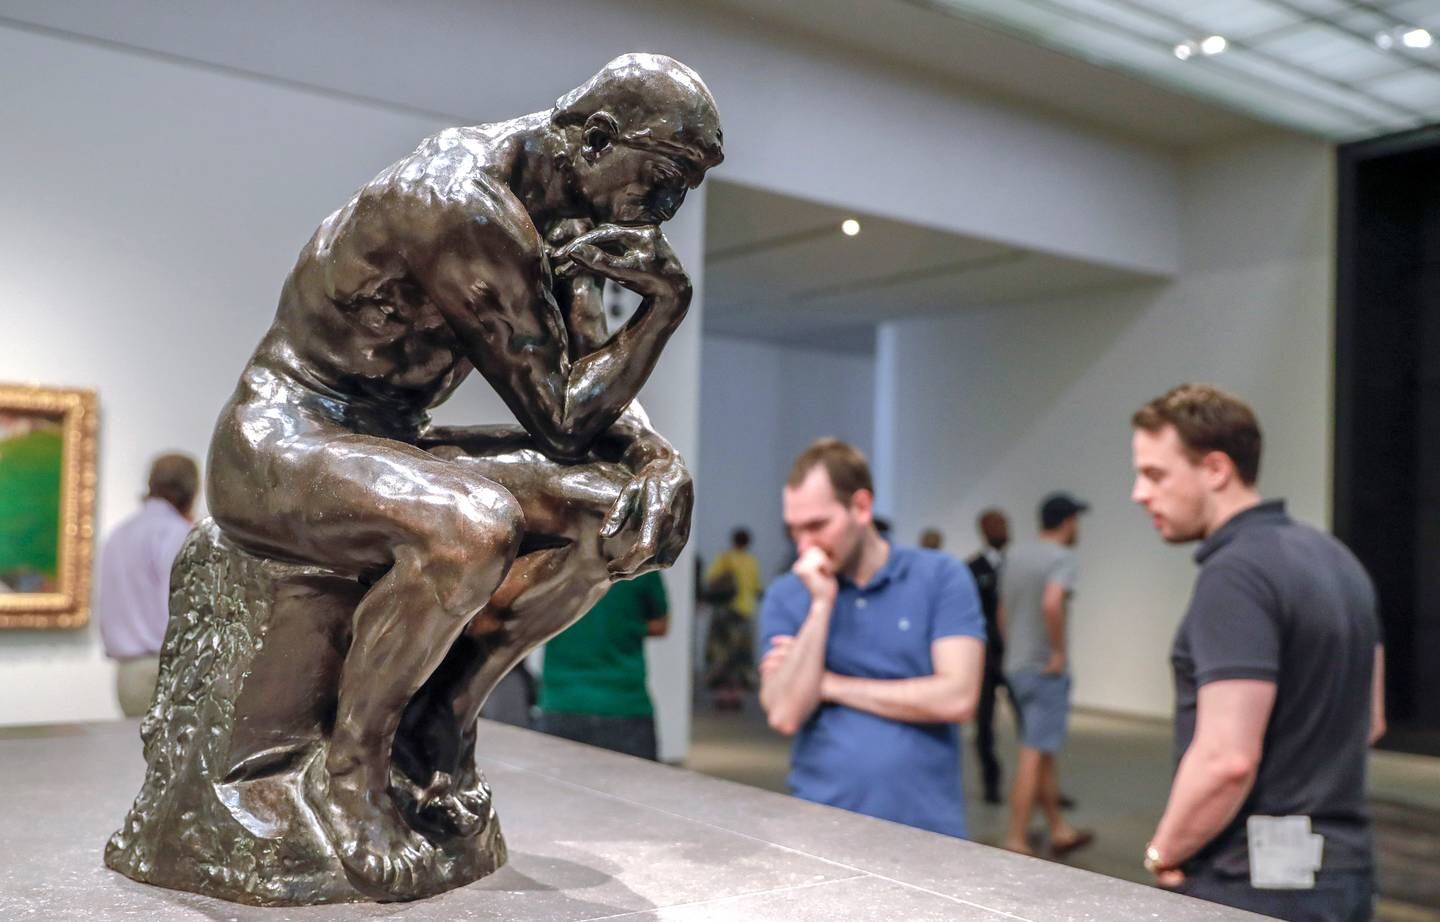 Abu Dhabi, United Arab Emirates, March 12, 2020.  Stock Images;  The Louvre Abu Dhabi.  Shot November 19, 2019.  The Thinker by Auguste Rodin, 1881-1882.Victor Besa / The NationalSection:  NA standaloneReporter: